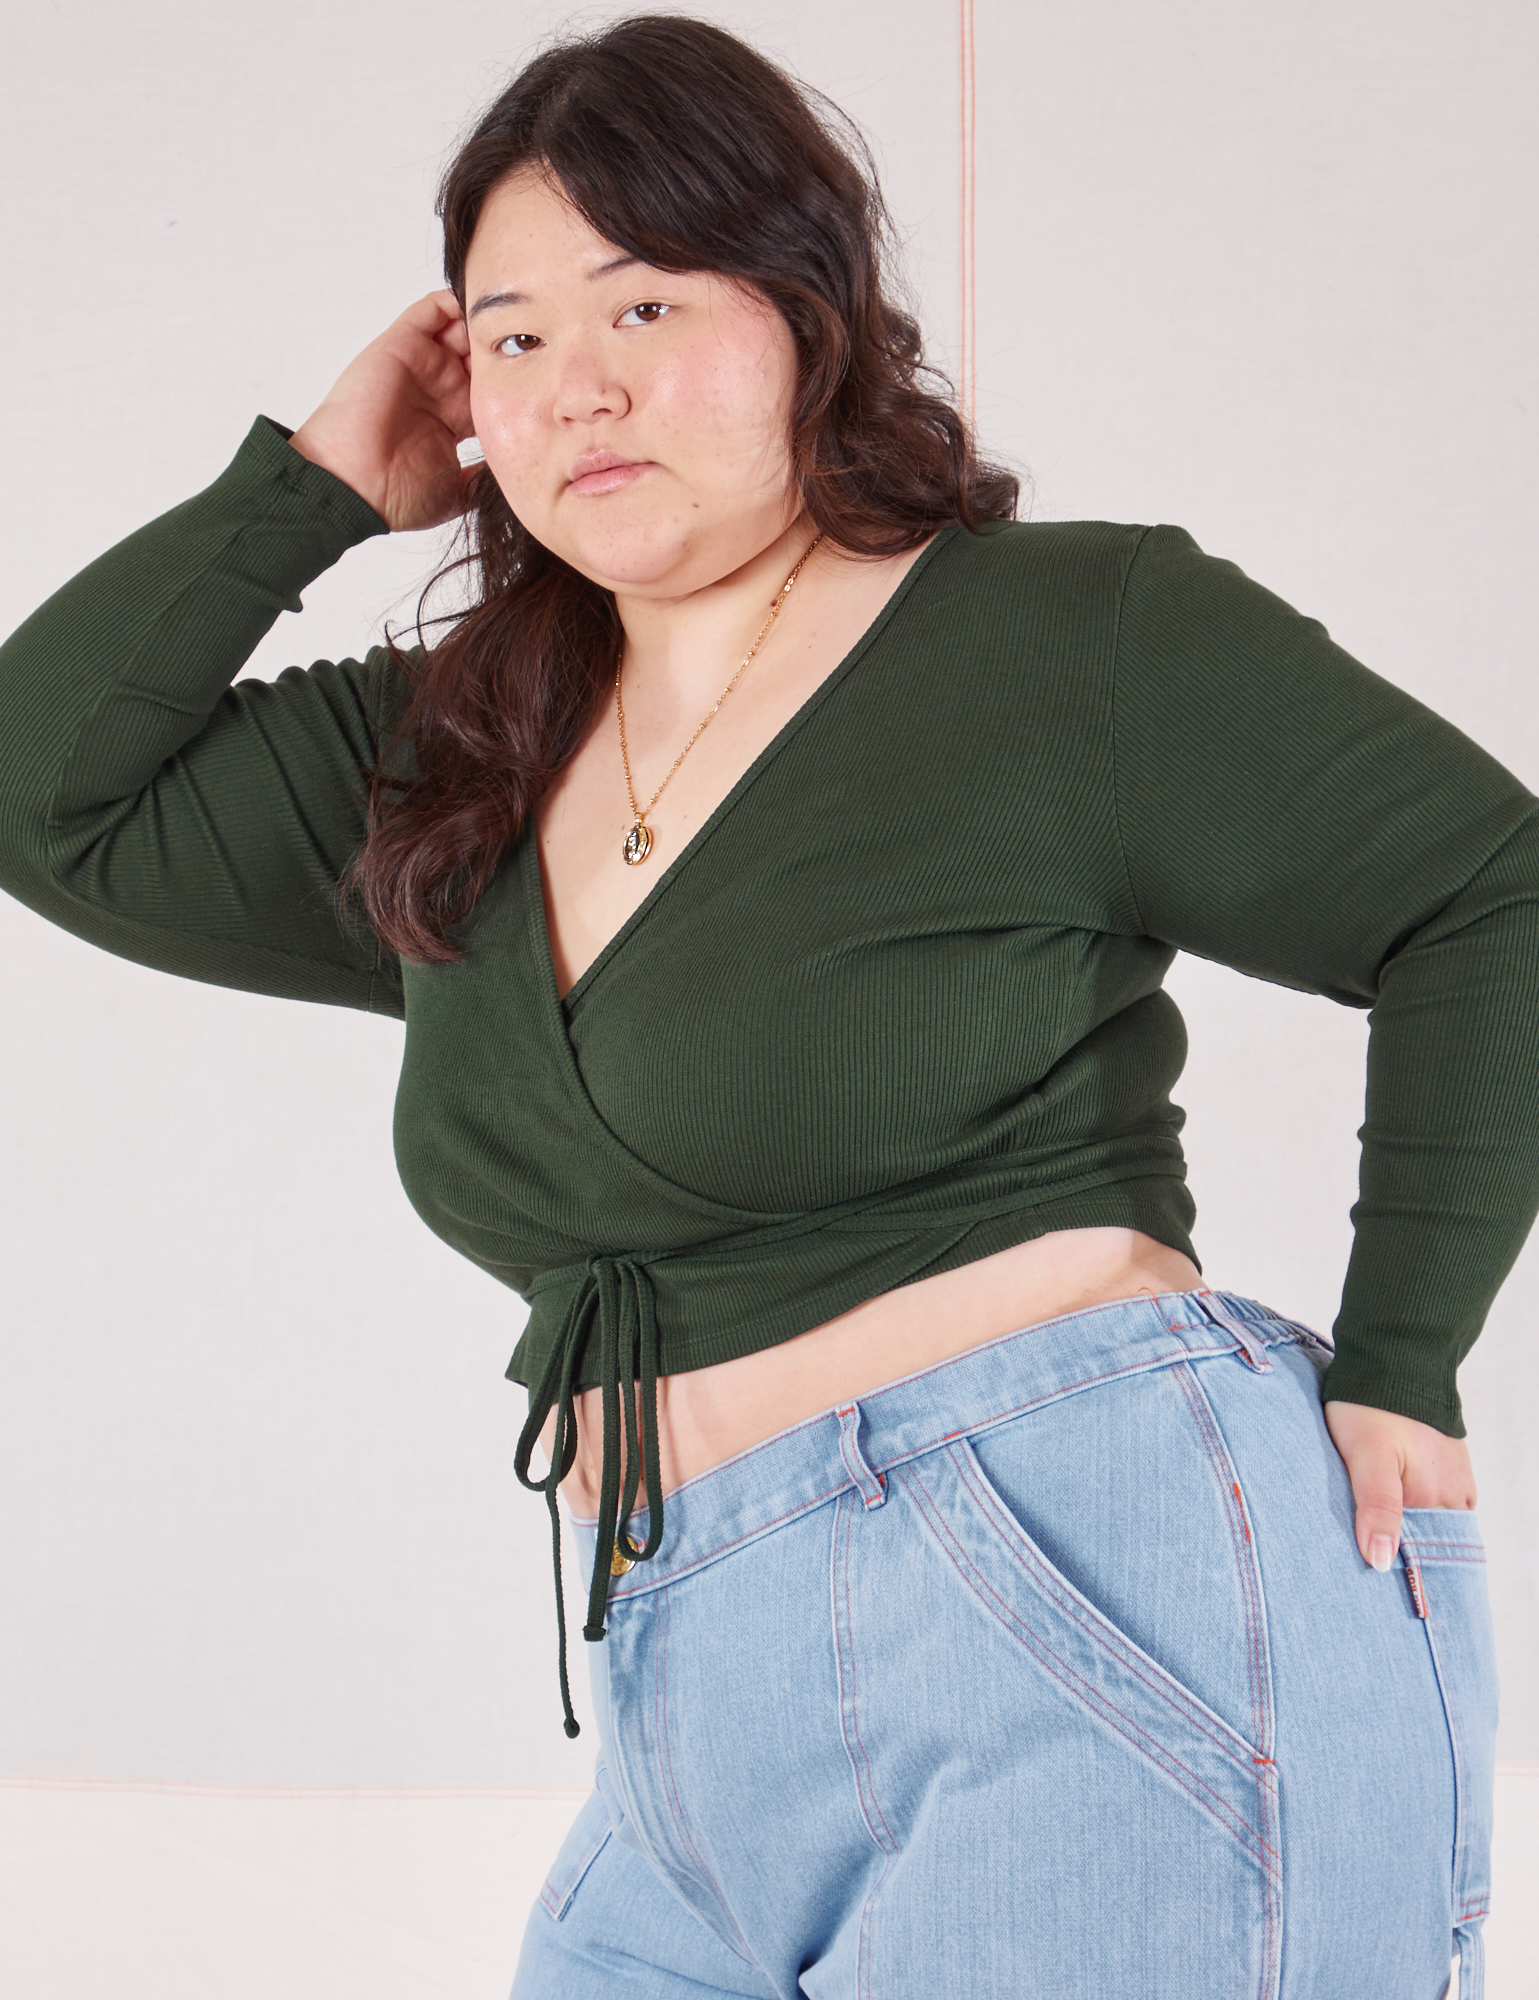 Wrap Top in Swamp Green angled front view on Ashley